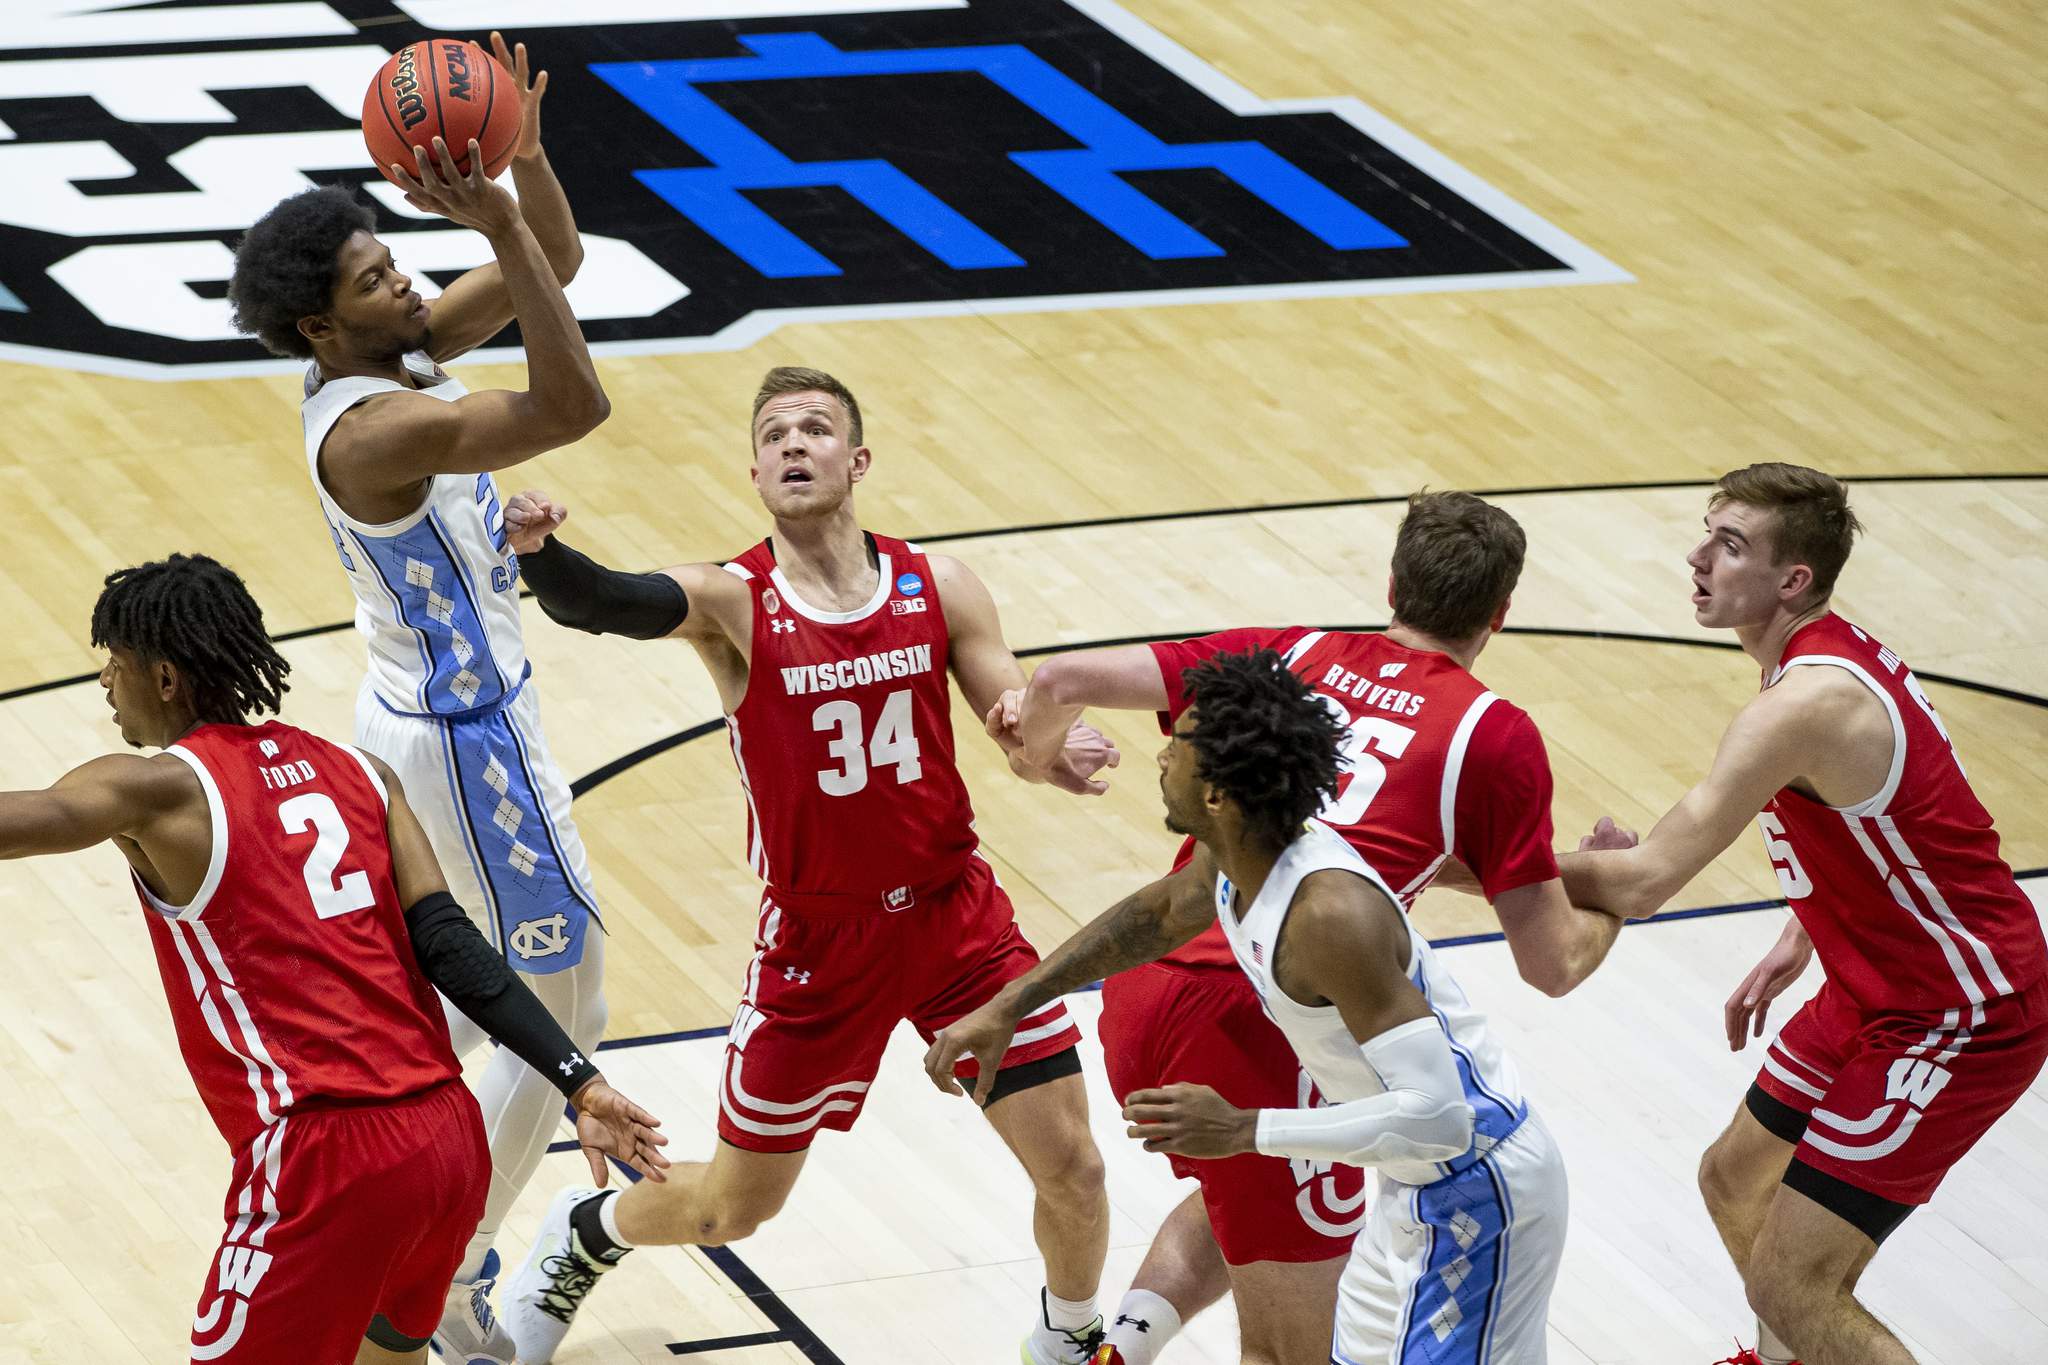 Wisconsin routs UNC, Williams falls to 29-1 in NCAA openers